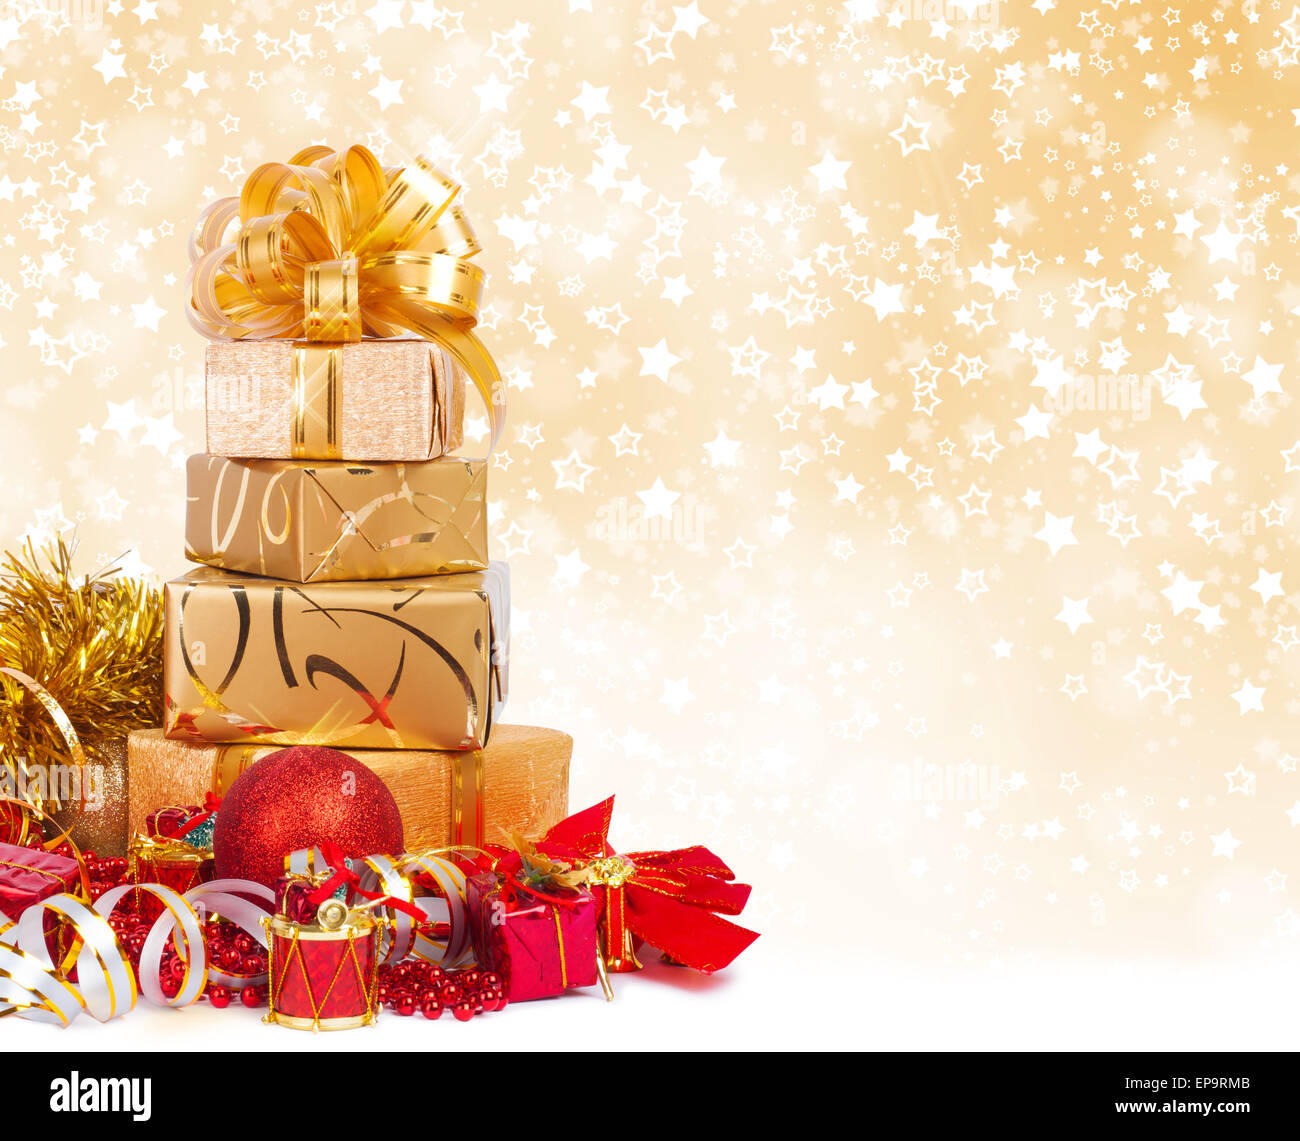 Gift box in gold wrapping paper on a beautiful abstract background Stock Photo